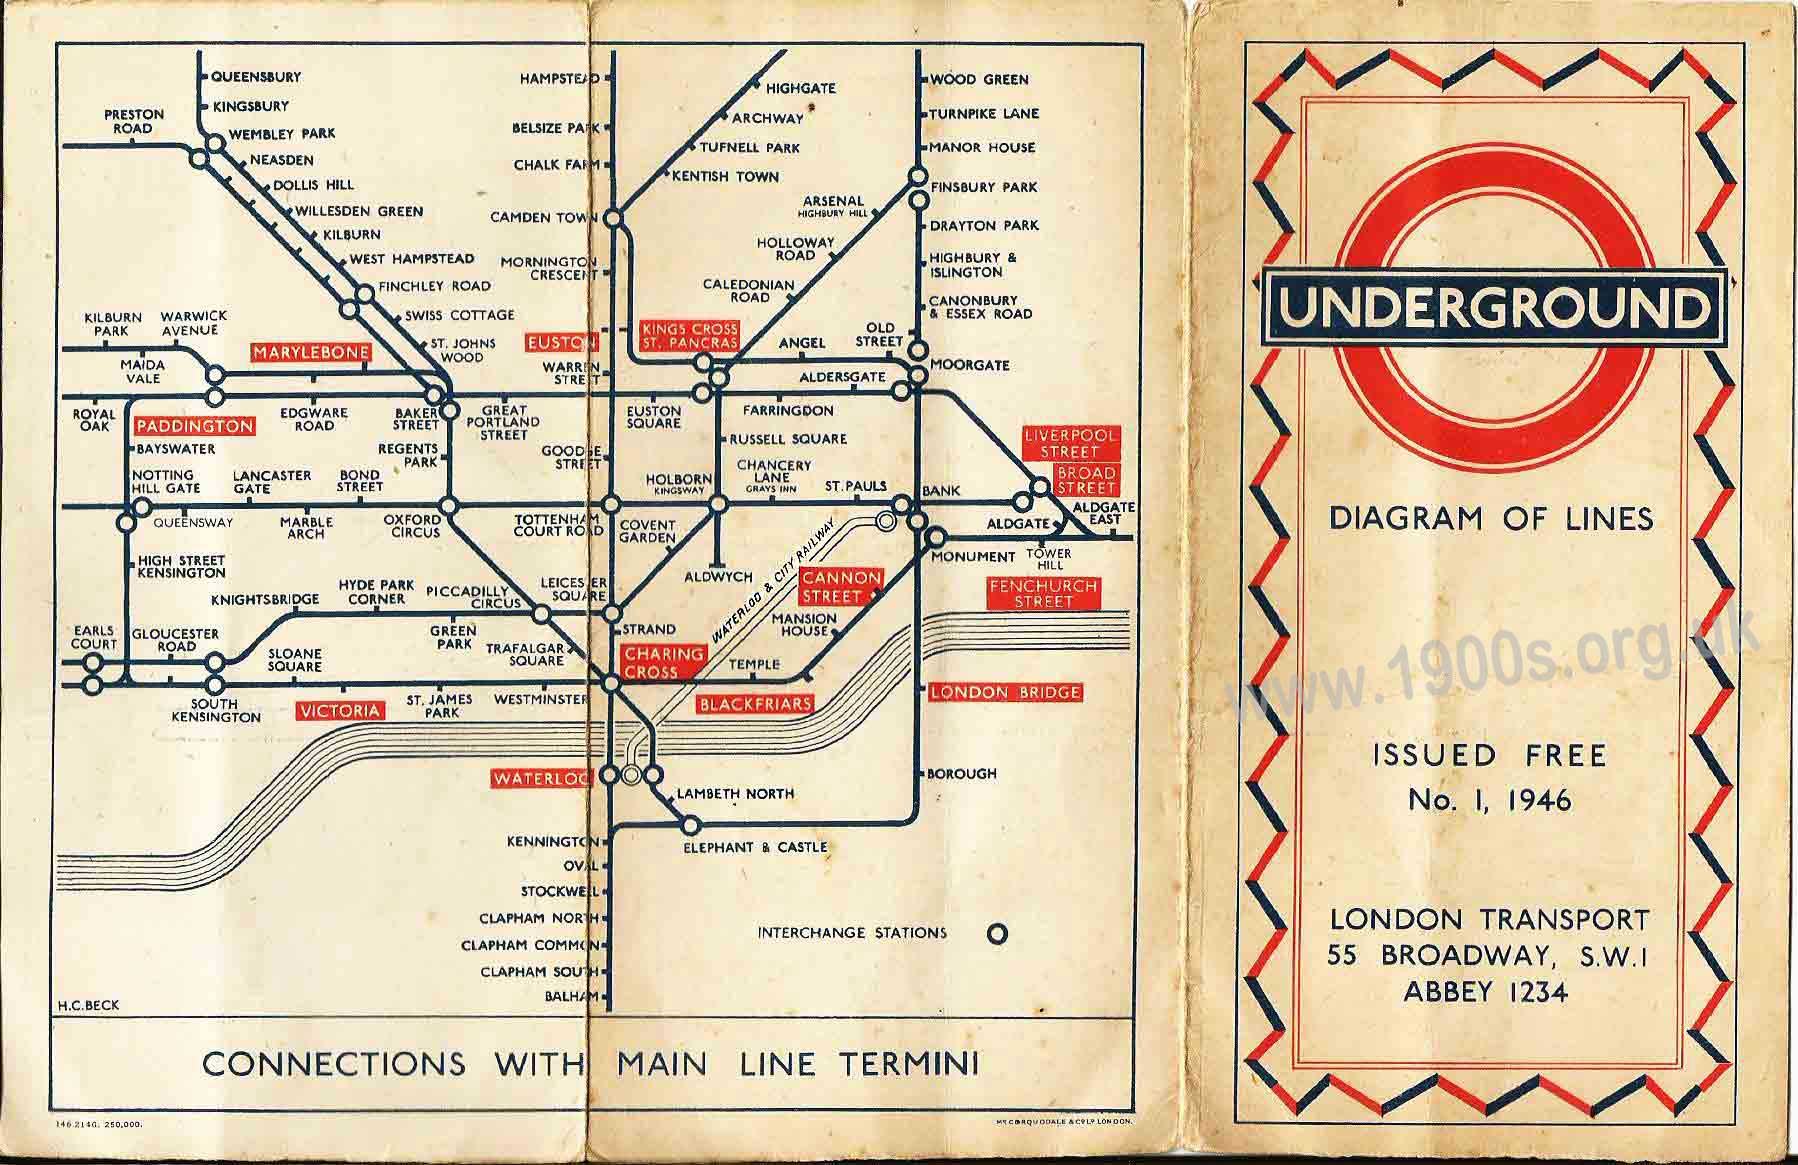 London underground/tube map with main line interchanges, 1946